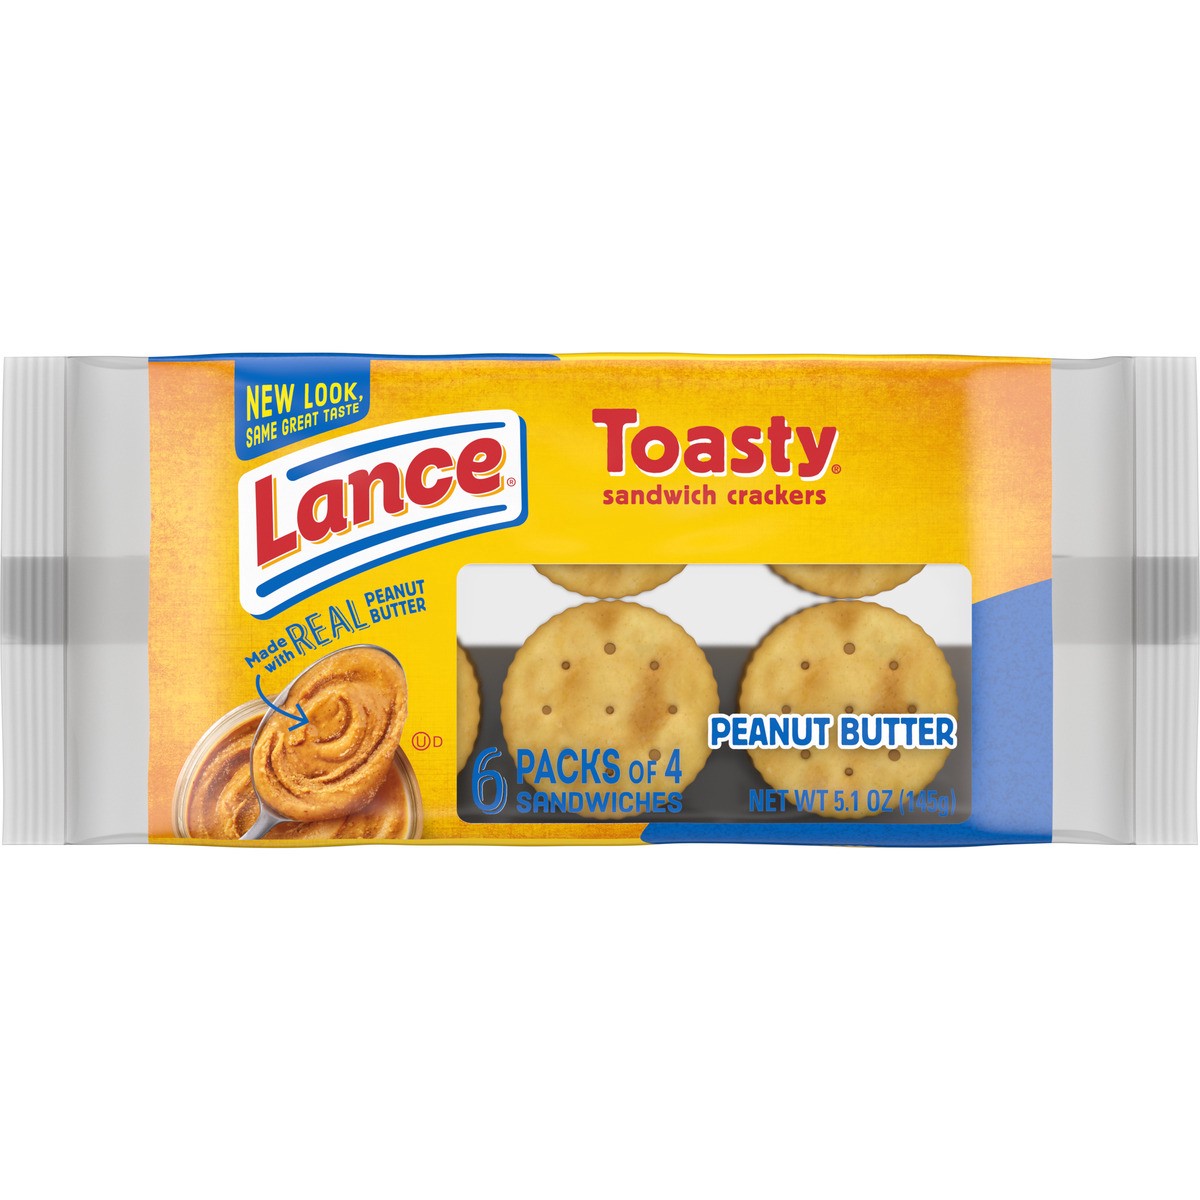 slide 11 of 11, Lance Sandwich Crackers, Toasty Peanut Butter, 6 Individually Wrapped Packs, 4 Sandwiches Each, 5.1 oz